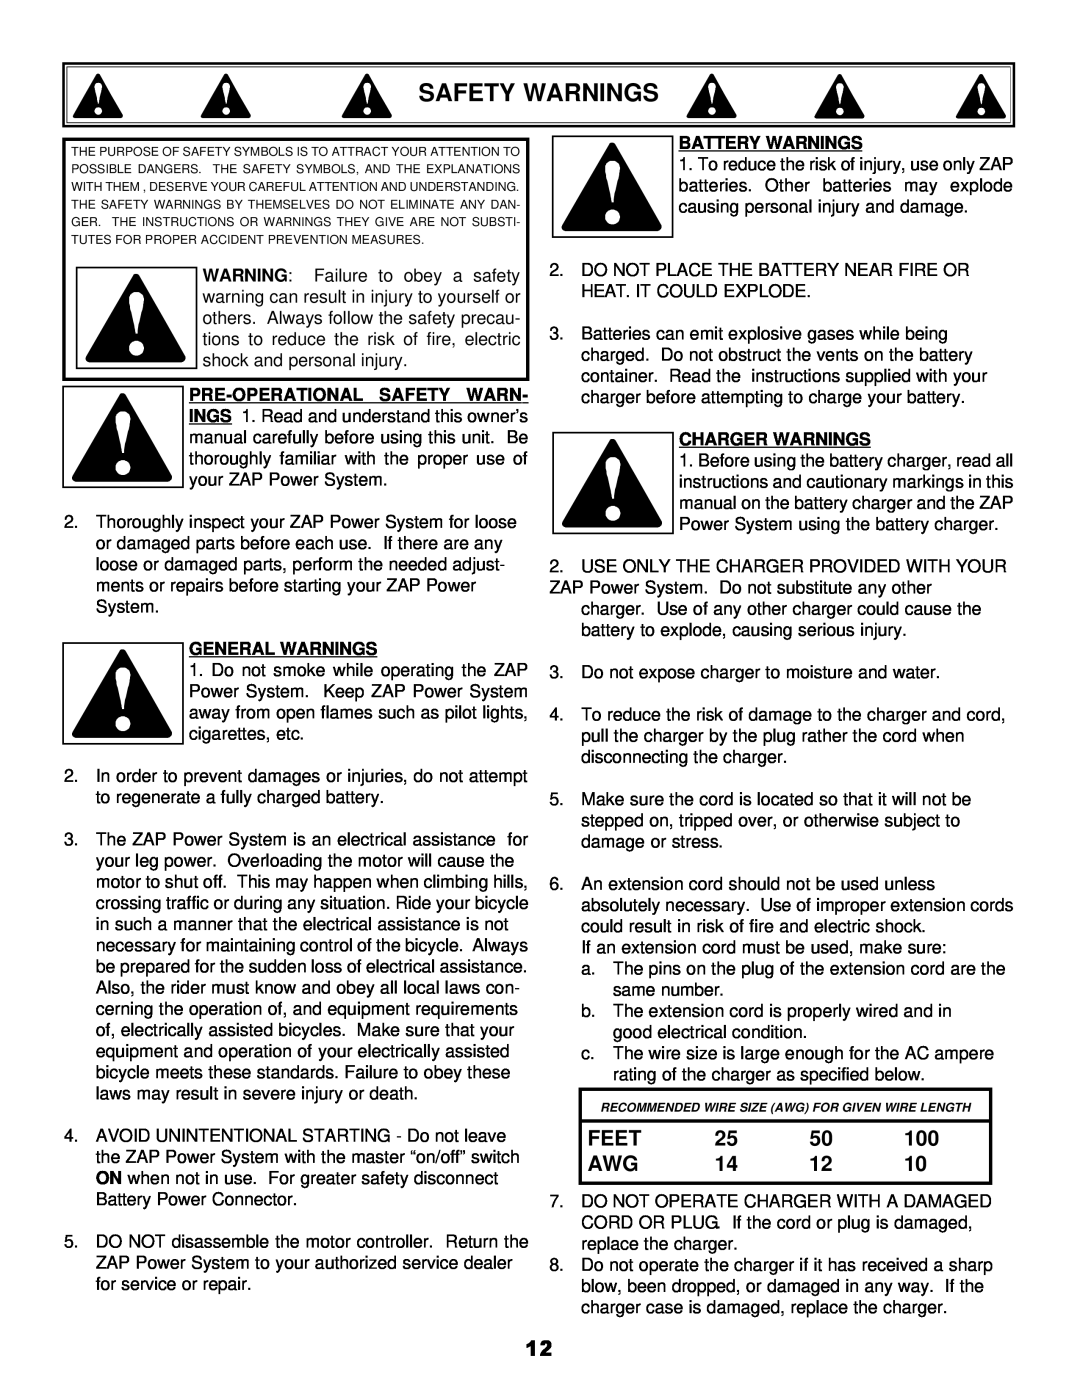 Zap DX owner manual Safety Warnings, Feet, General Warnings, Battery Warnings, Charger Warnings 